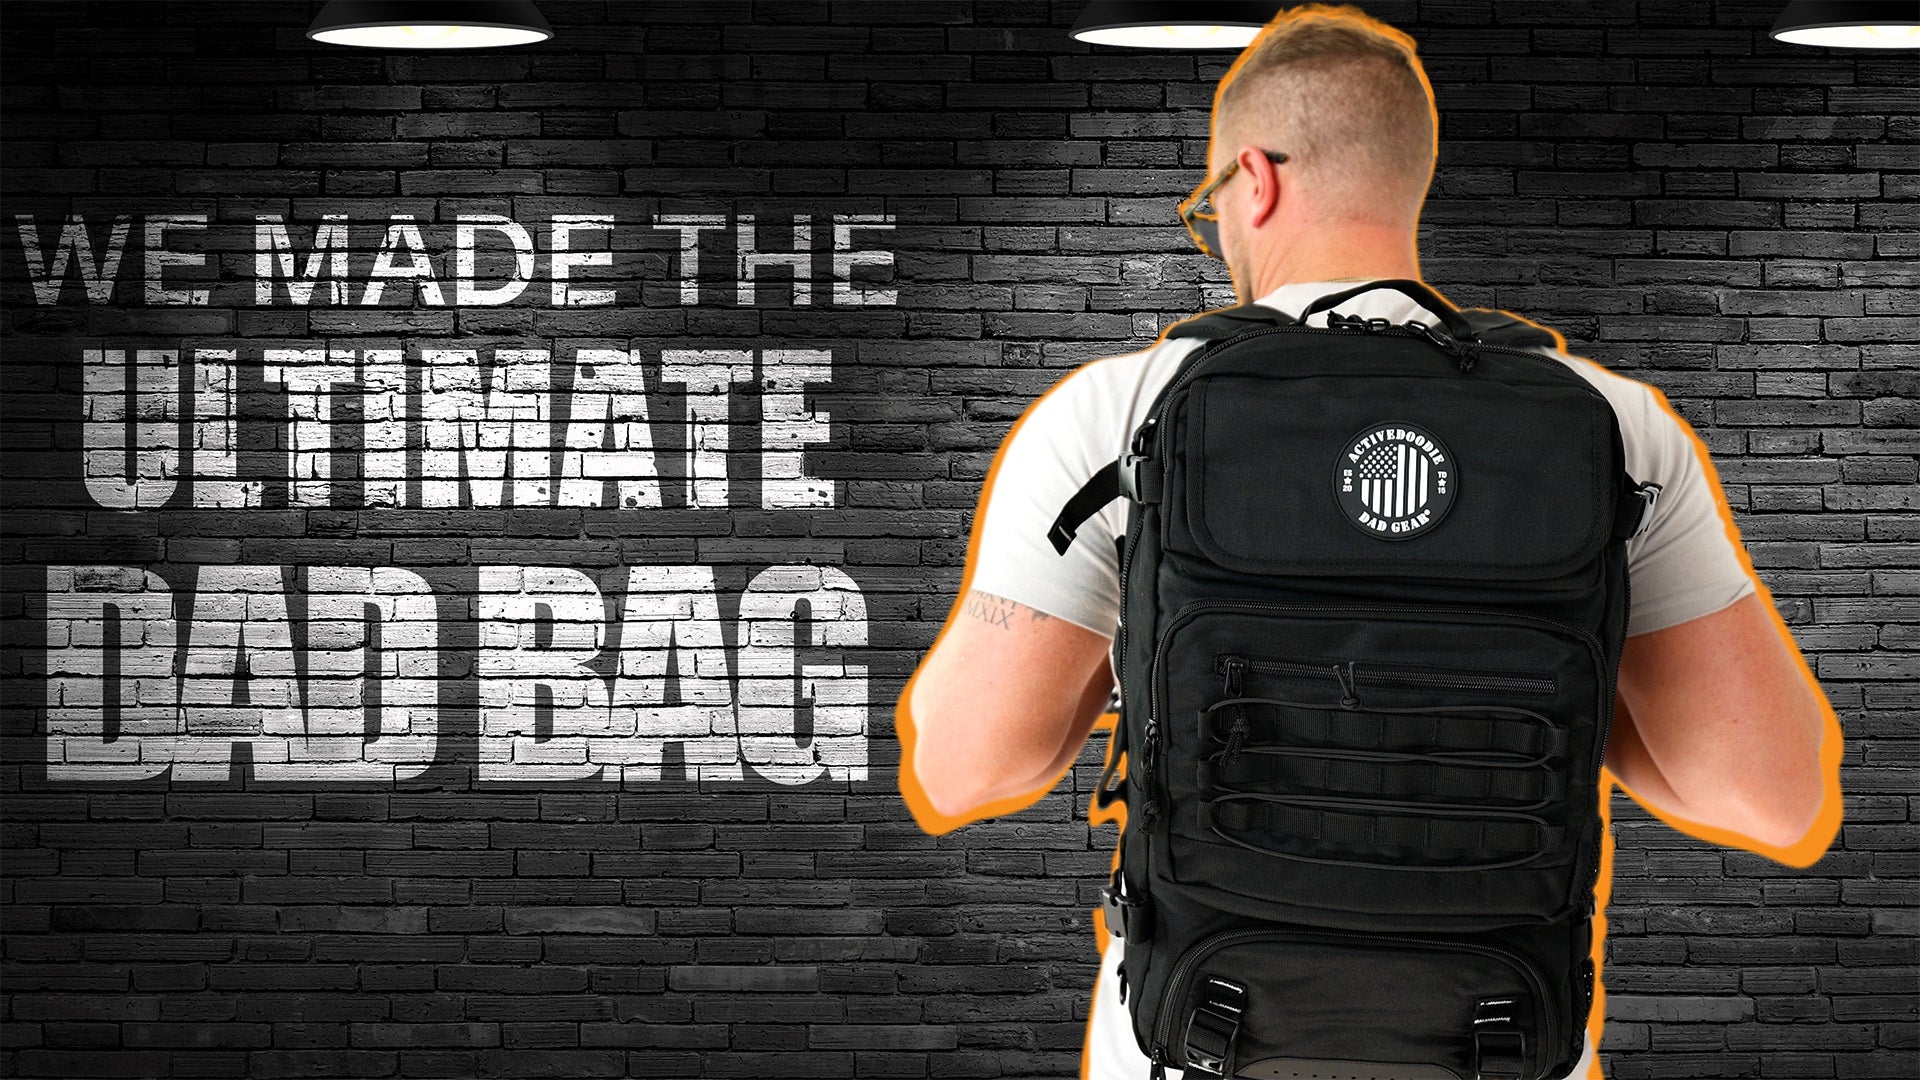 Active Doodie Dad Diaper Bag Backpack - Dad Squad Diaper Bag for Dads